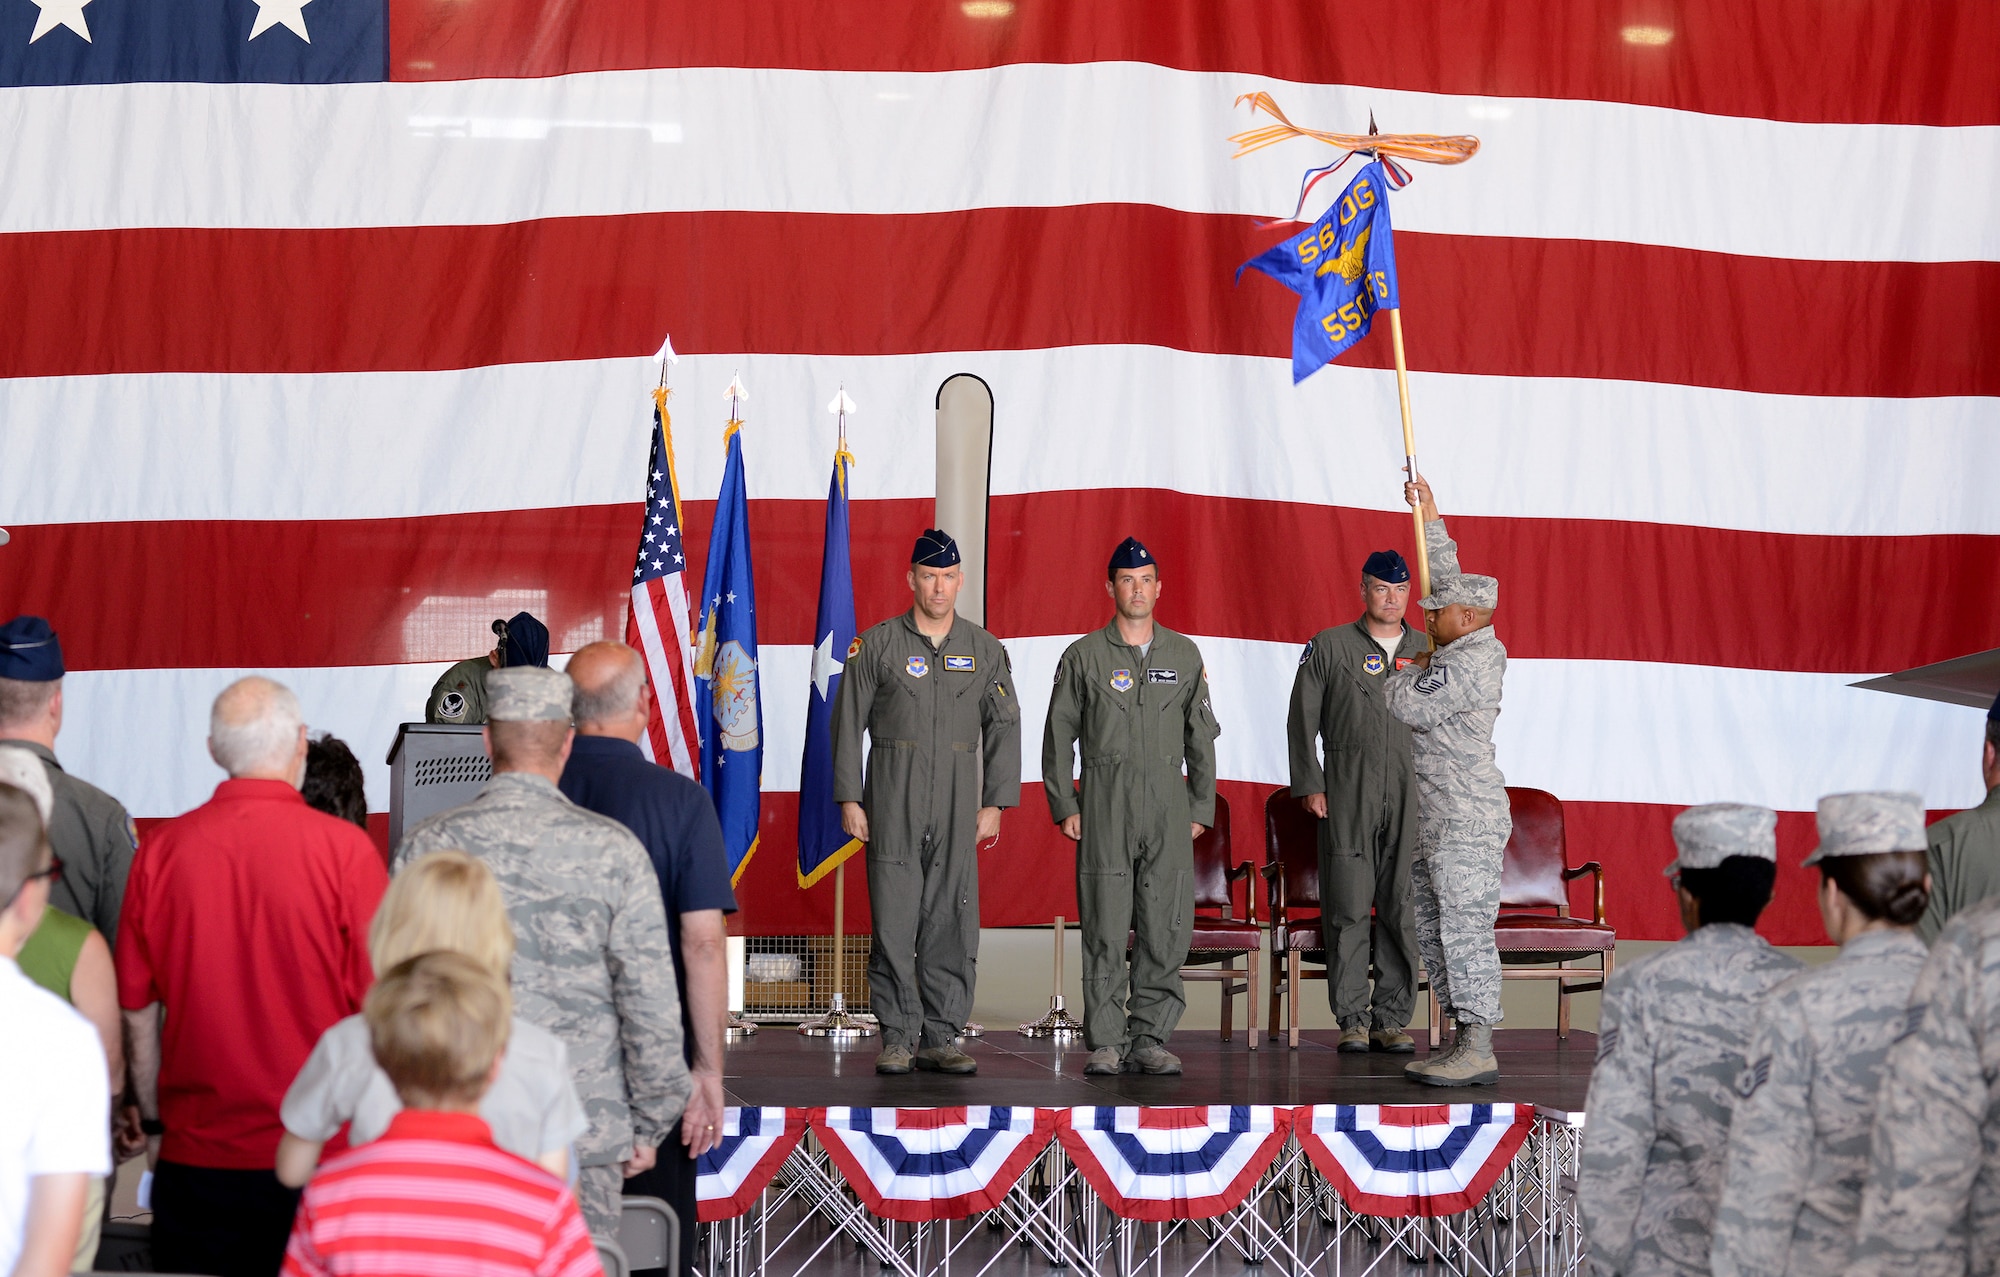 U.S. Air Force members from the 173rd Fighter Wing and 550th Fighter Squadron stand at attention as the new 550th FS guideon is presented during an activation ceremony, July 21, 2017, at Kingsley Field in Klamath Falls, Oregon. The active duty Air Force detachment based out of the Kingsley Field, previously known as Detachment 2, is now officially designated as the 550th Fighter Squadron. 550th Fighter Squadron members will continue to fall under the command of the 56th Operations Group at Luke Air Force Base, Arizona. (U.S. Air National Guard photo by Staff Sgt. Penny Snoozy)